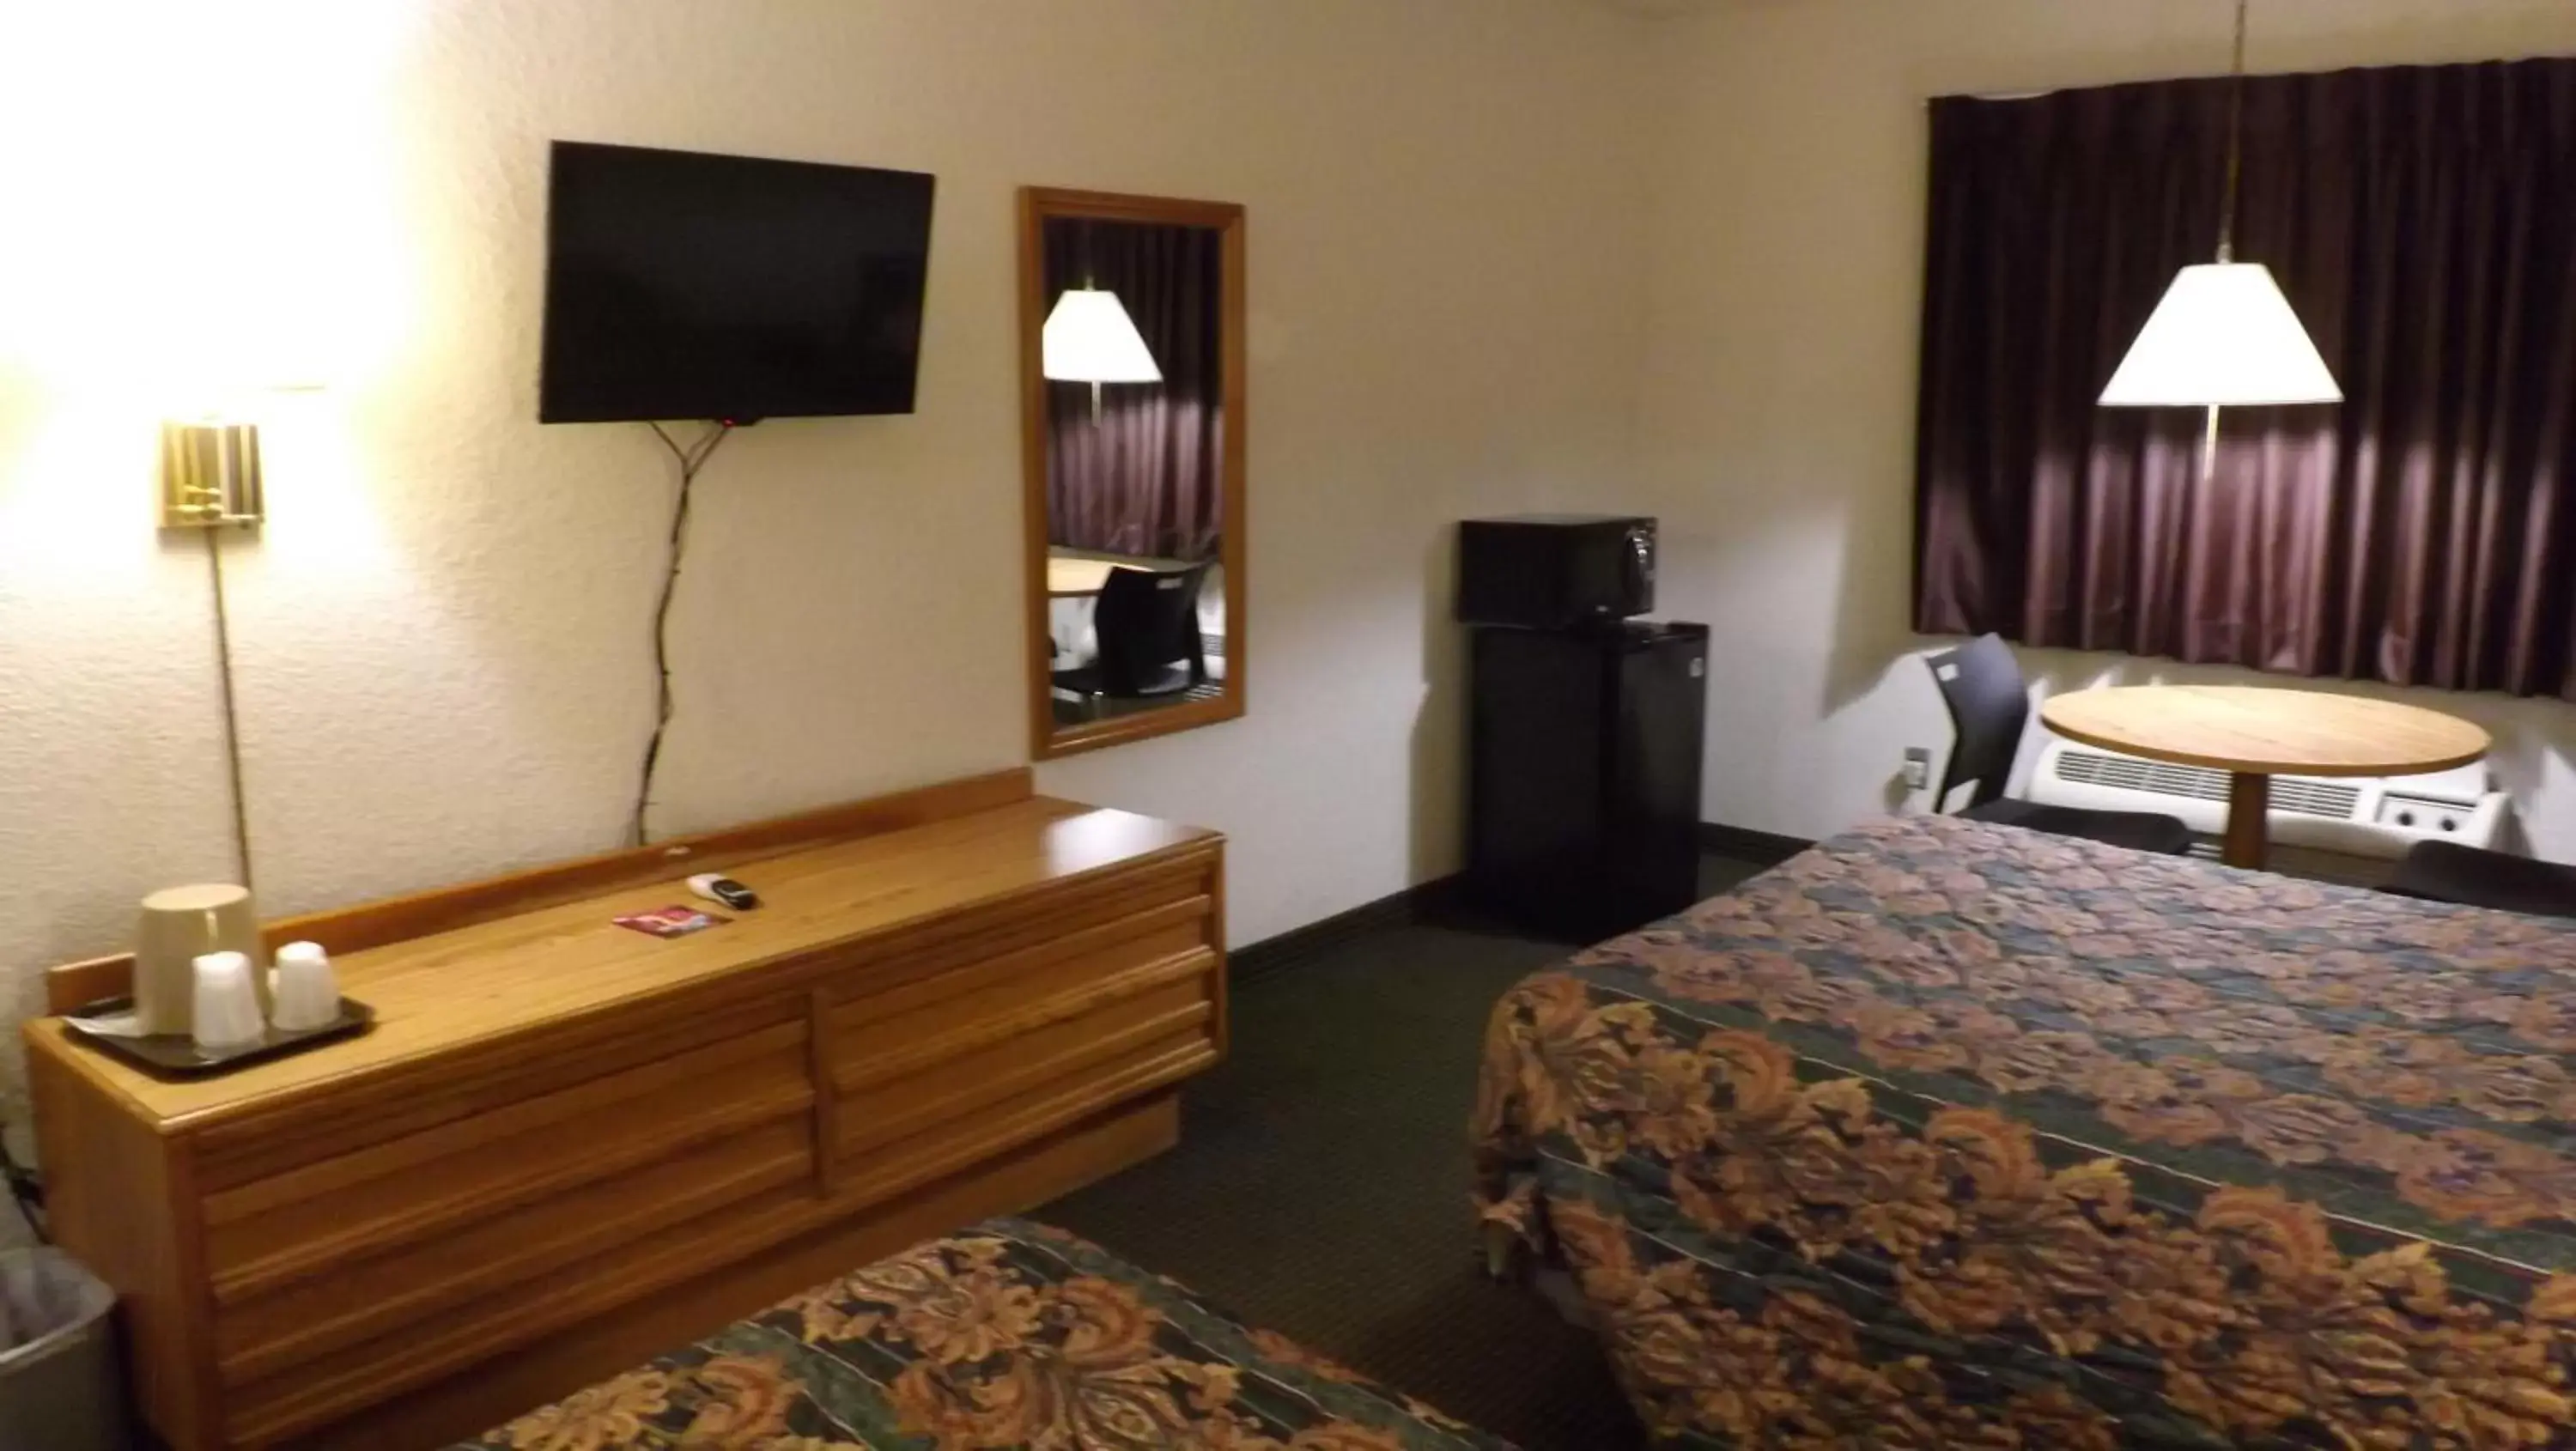 Bed in KCI Lodge